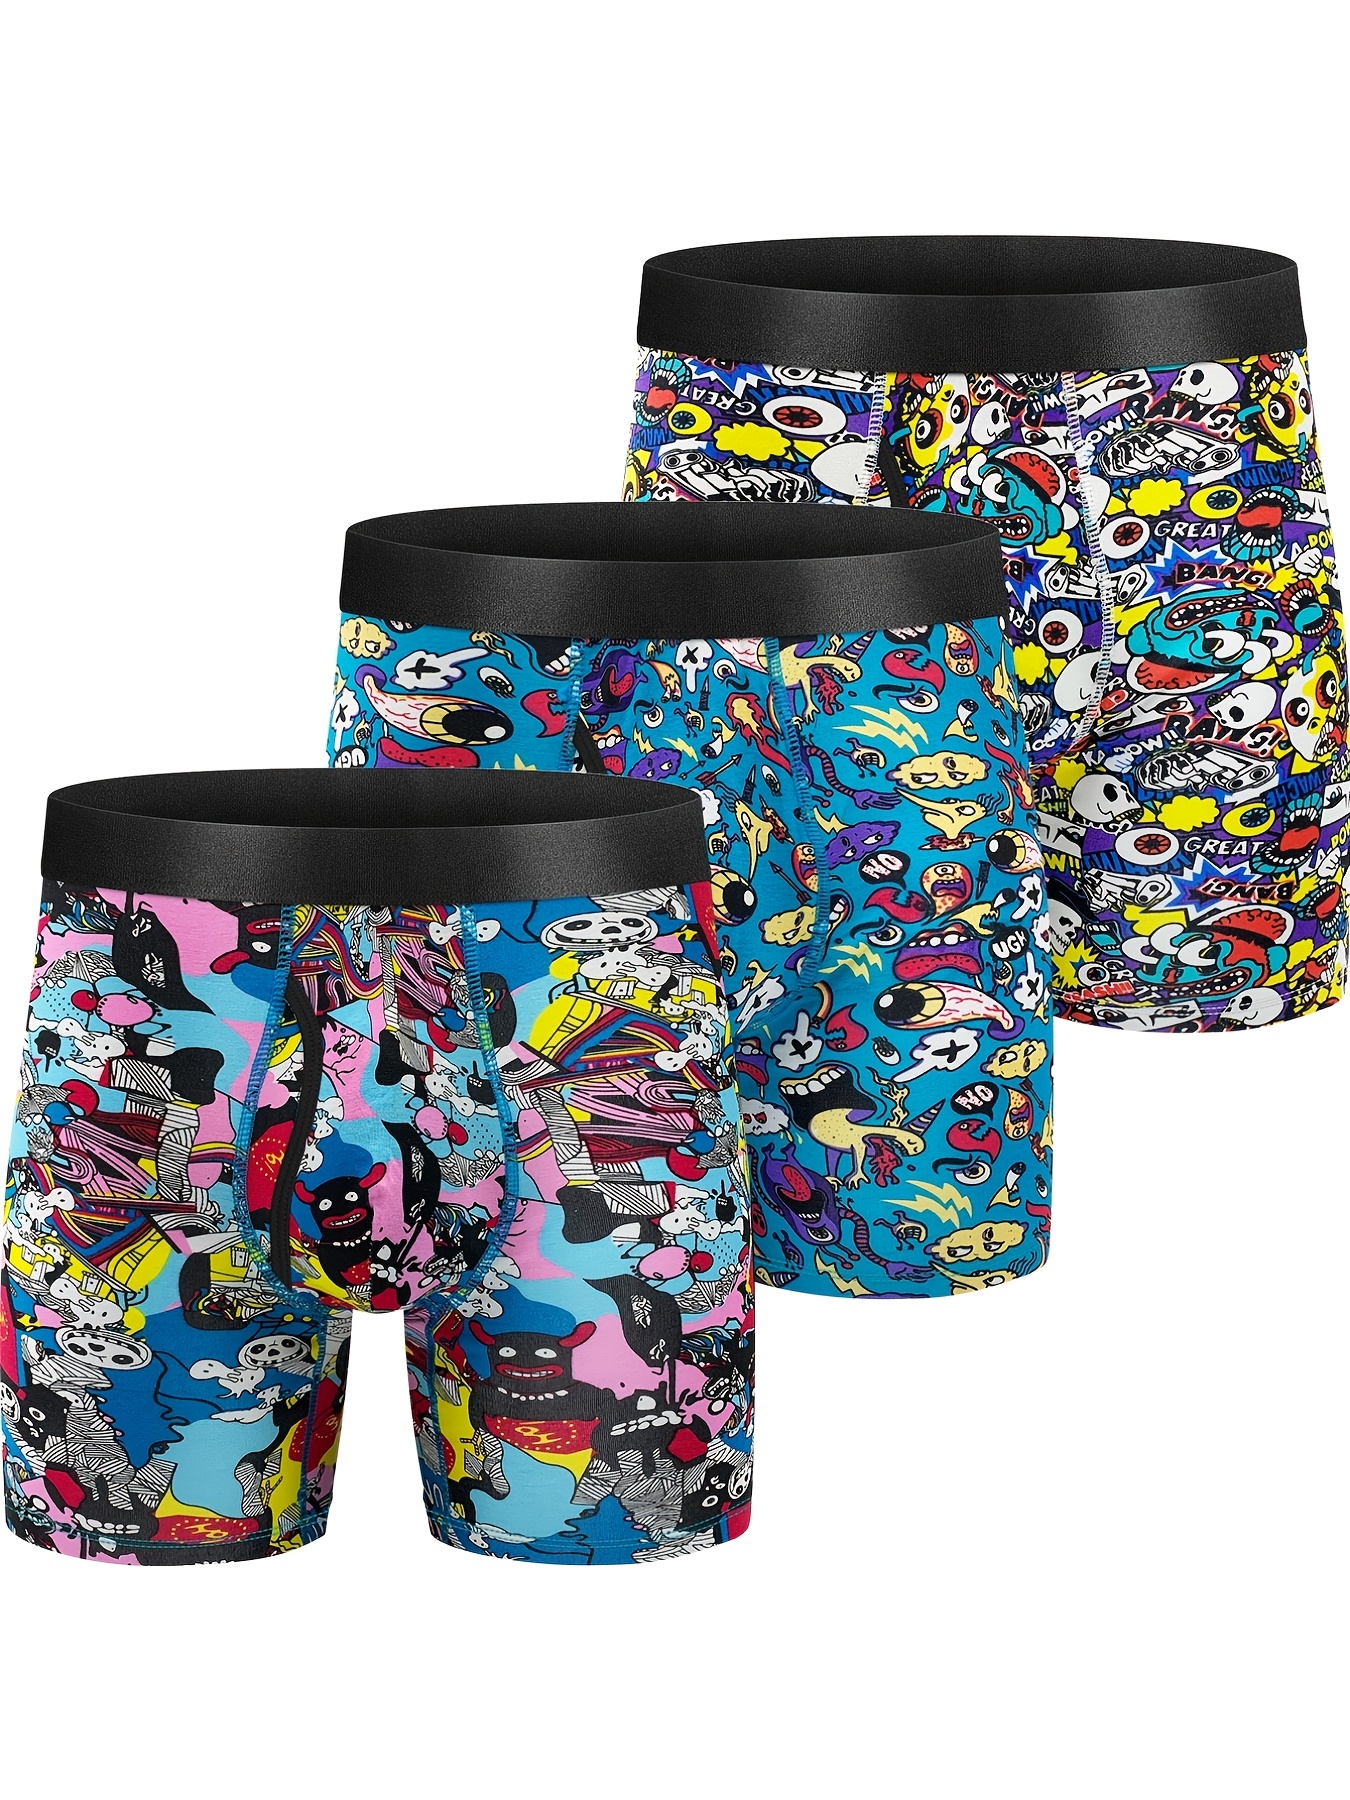 4pcs Men's Thin Breathable Sports Trendy Stylish Boxer Briefs, Korean Style  Cartoon Print Underwear Panties For Spring And Summer